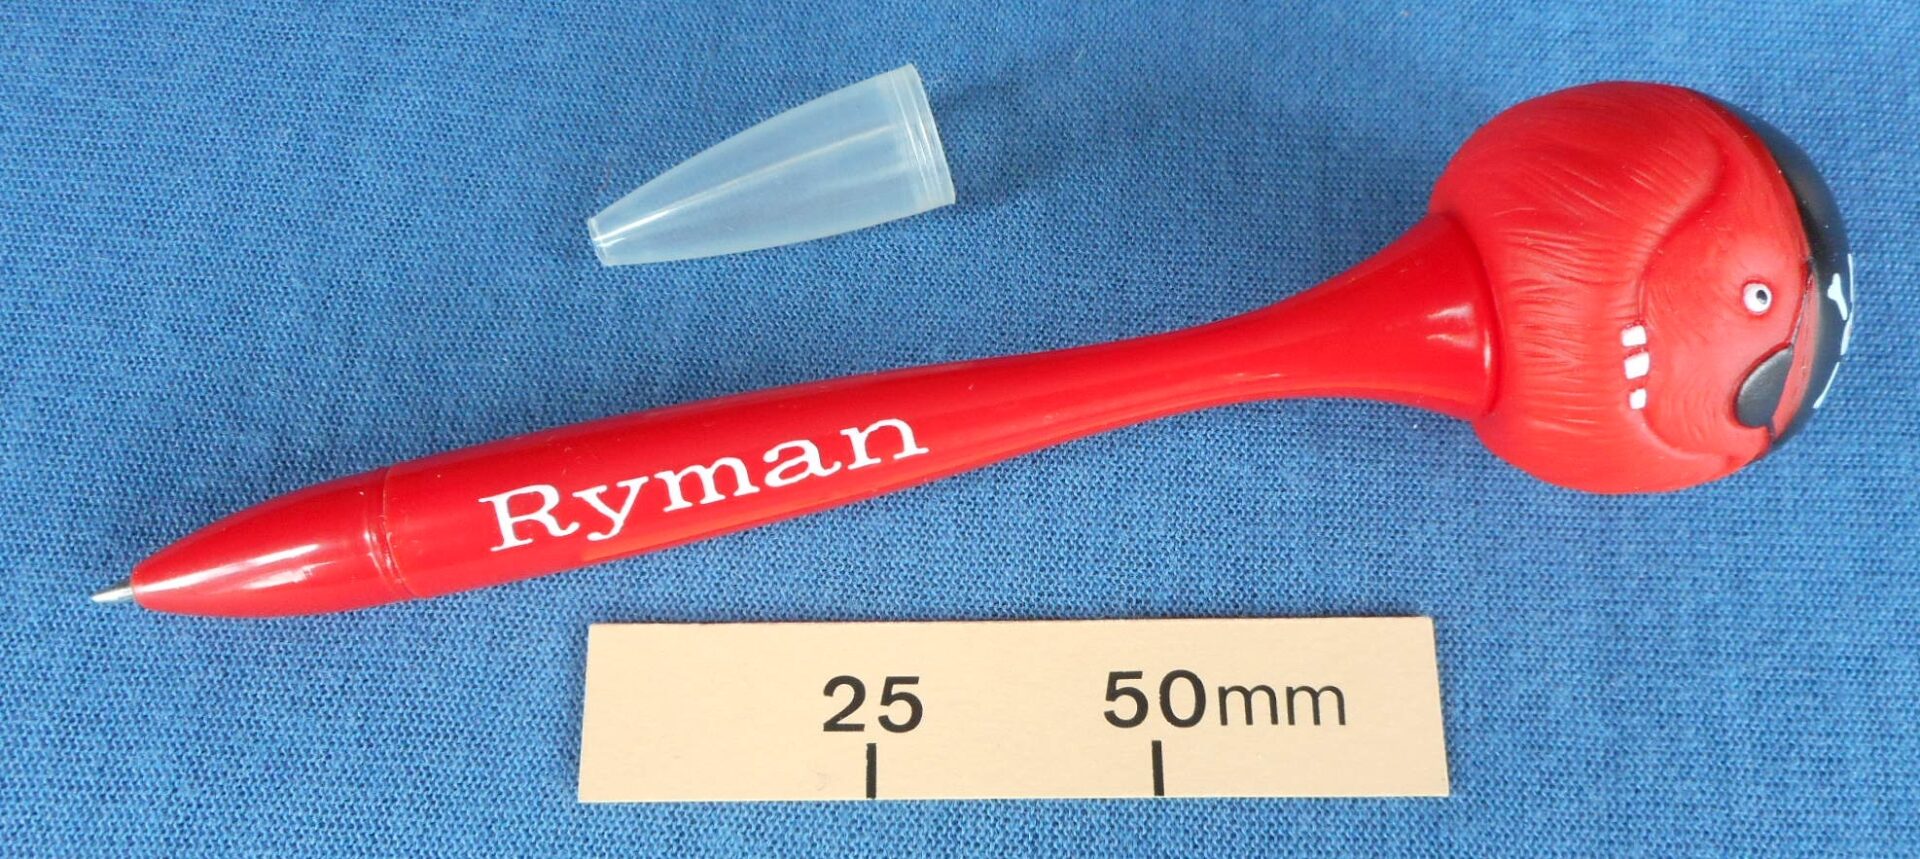 Novelty pirate red ball point pen sold by Ryman the stationers